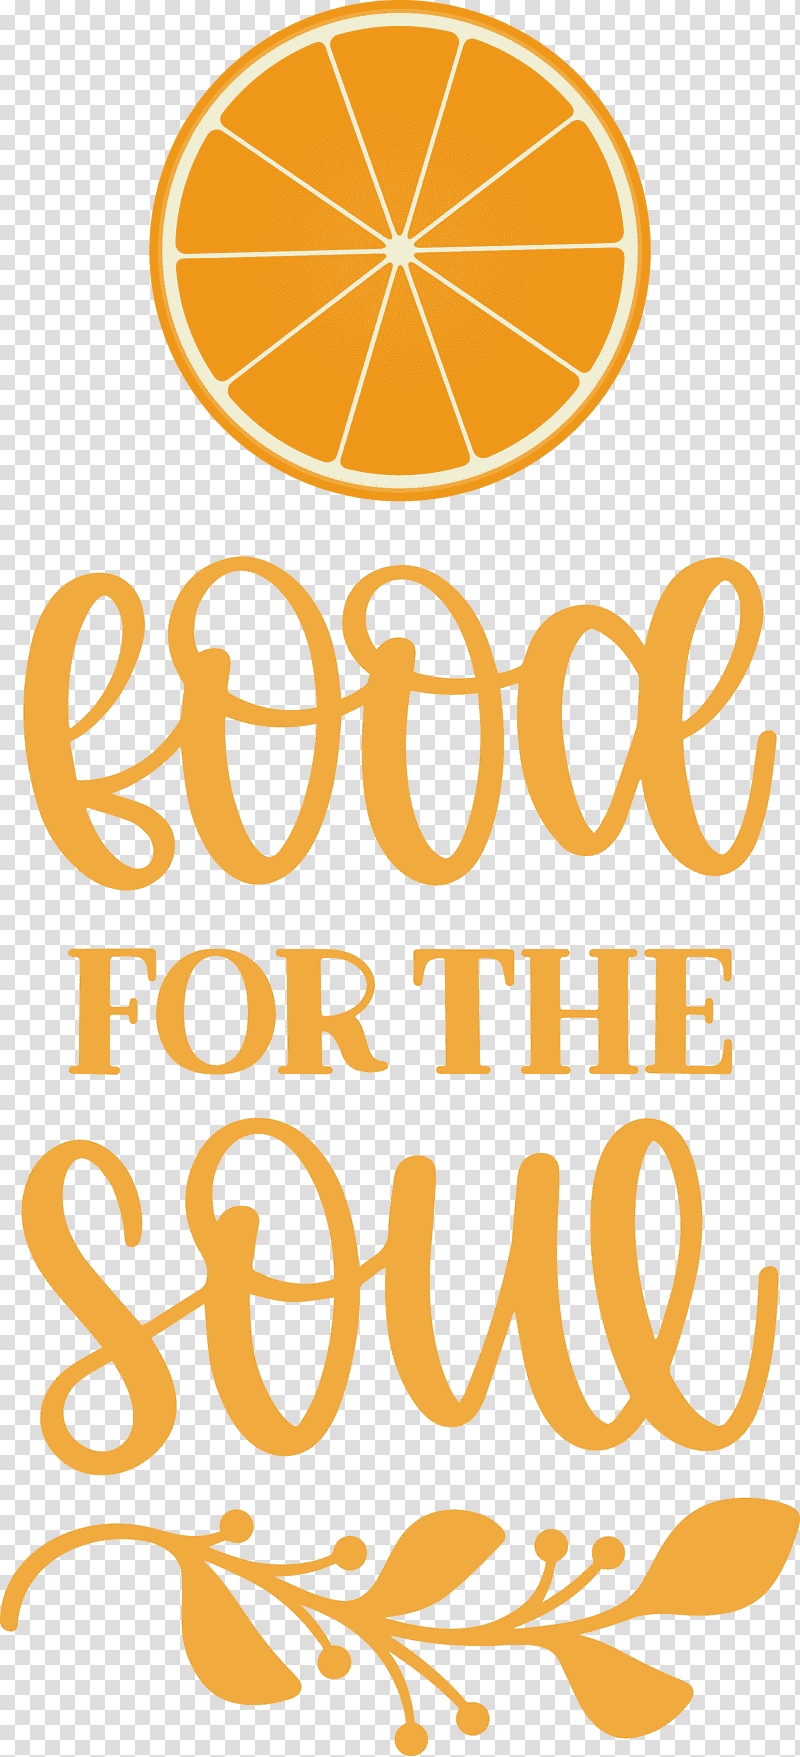 Food for the soul Food Cooking, Royaltyfree, Poster, Social Media, Cartoon, Text transparent background PNG clipart